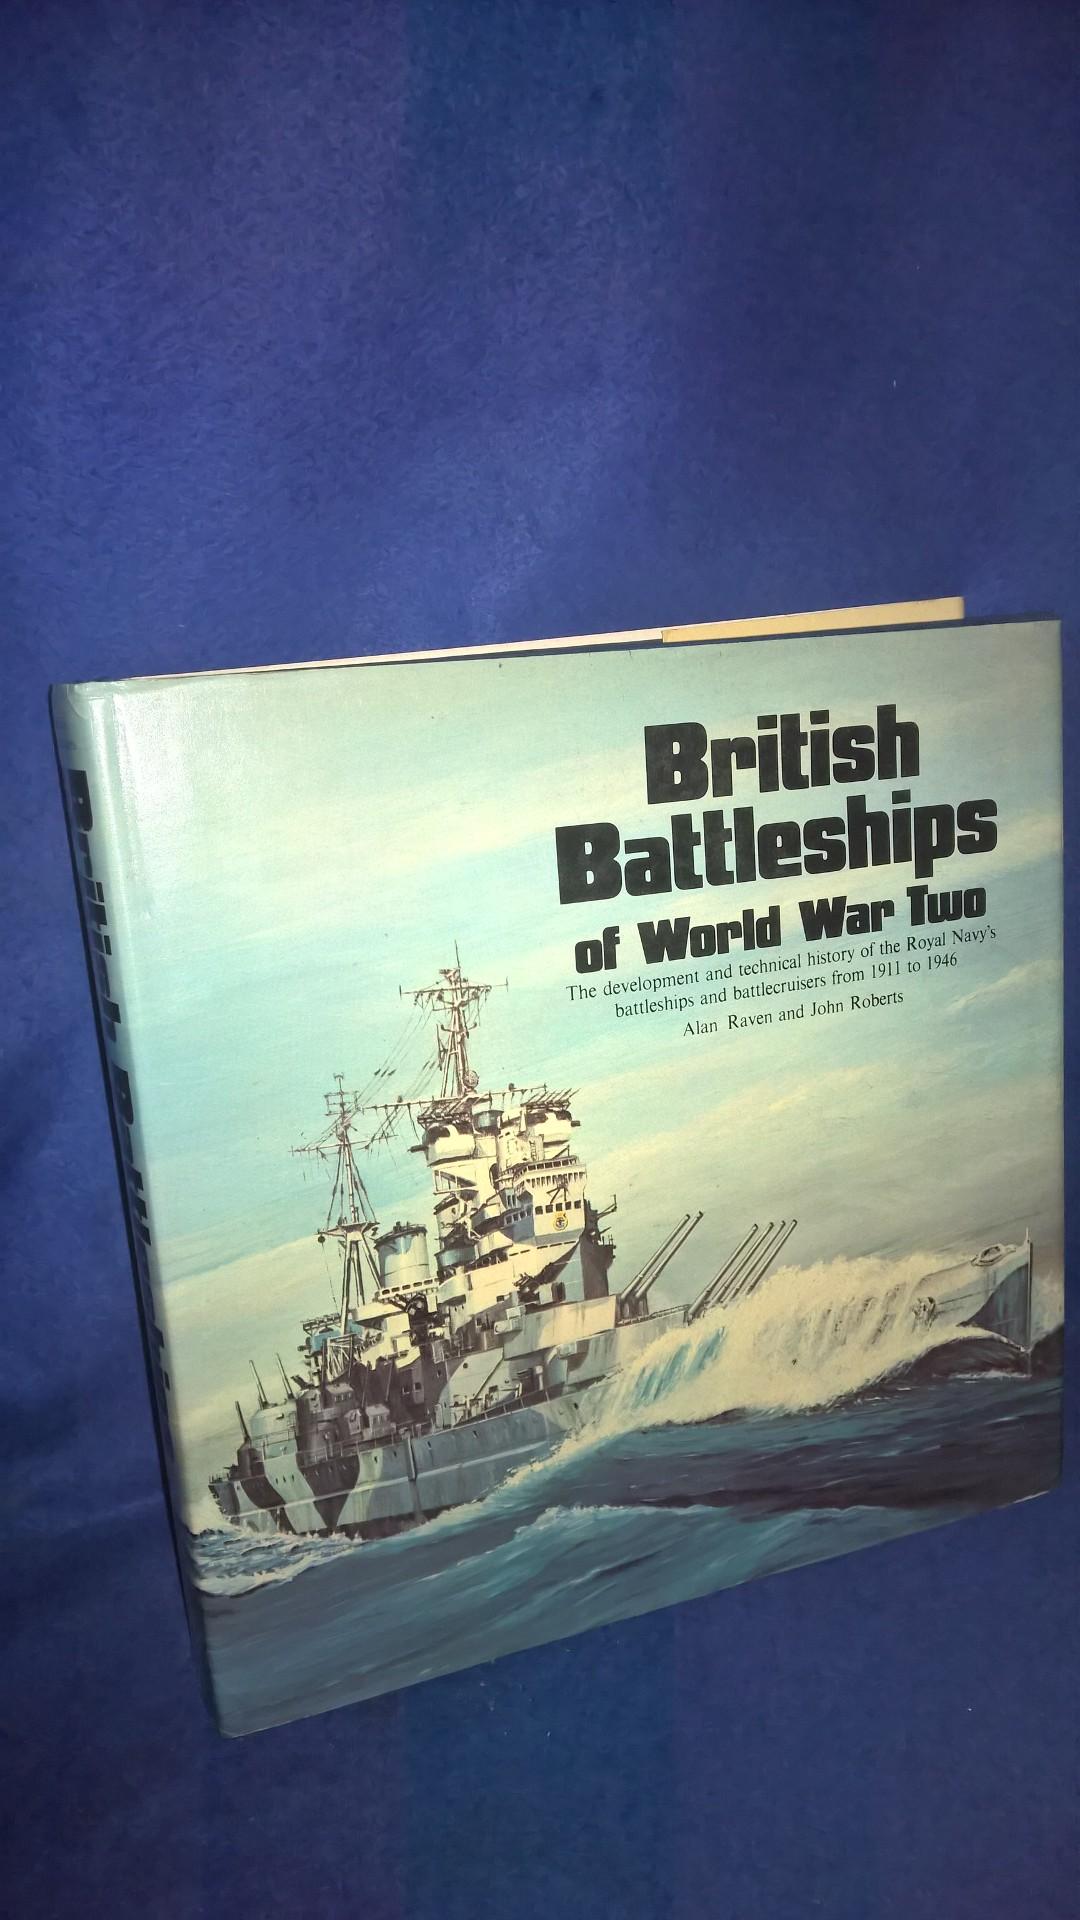 British Battleships of World War 2. The Development and Technical History of the Royal Navy´s Battleships and Battlecruisers from 1911 to 1946.